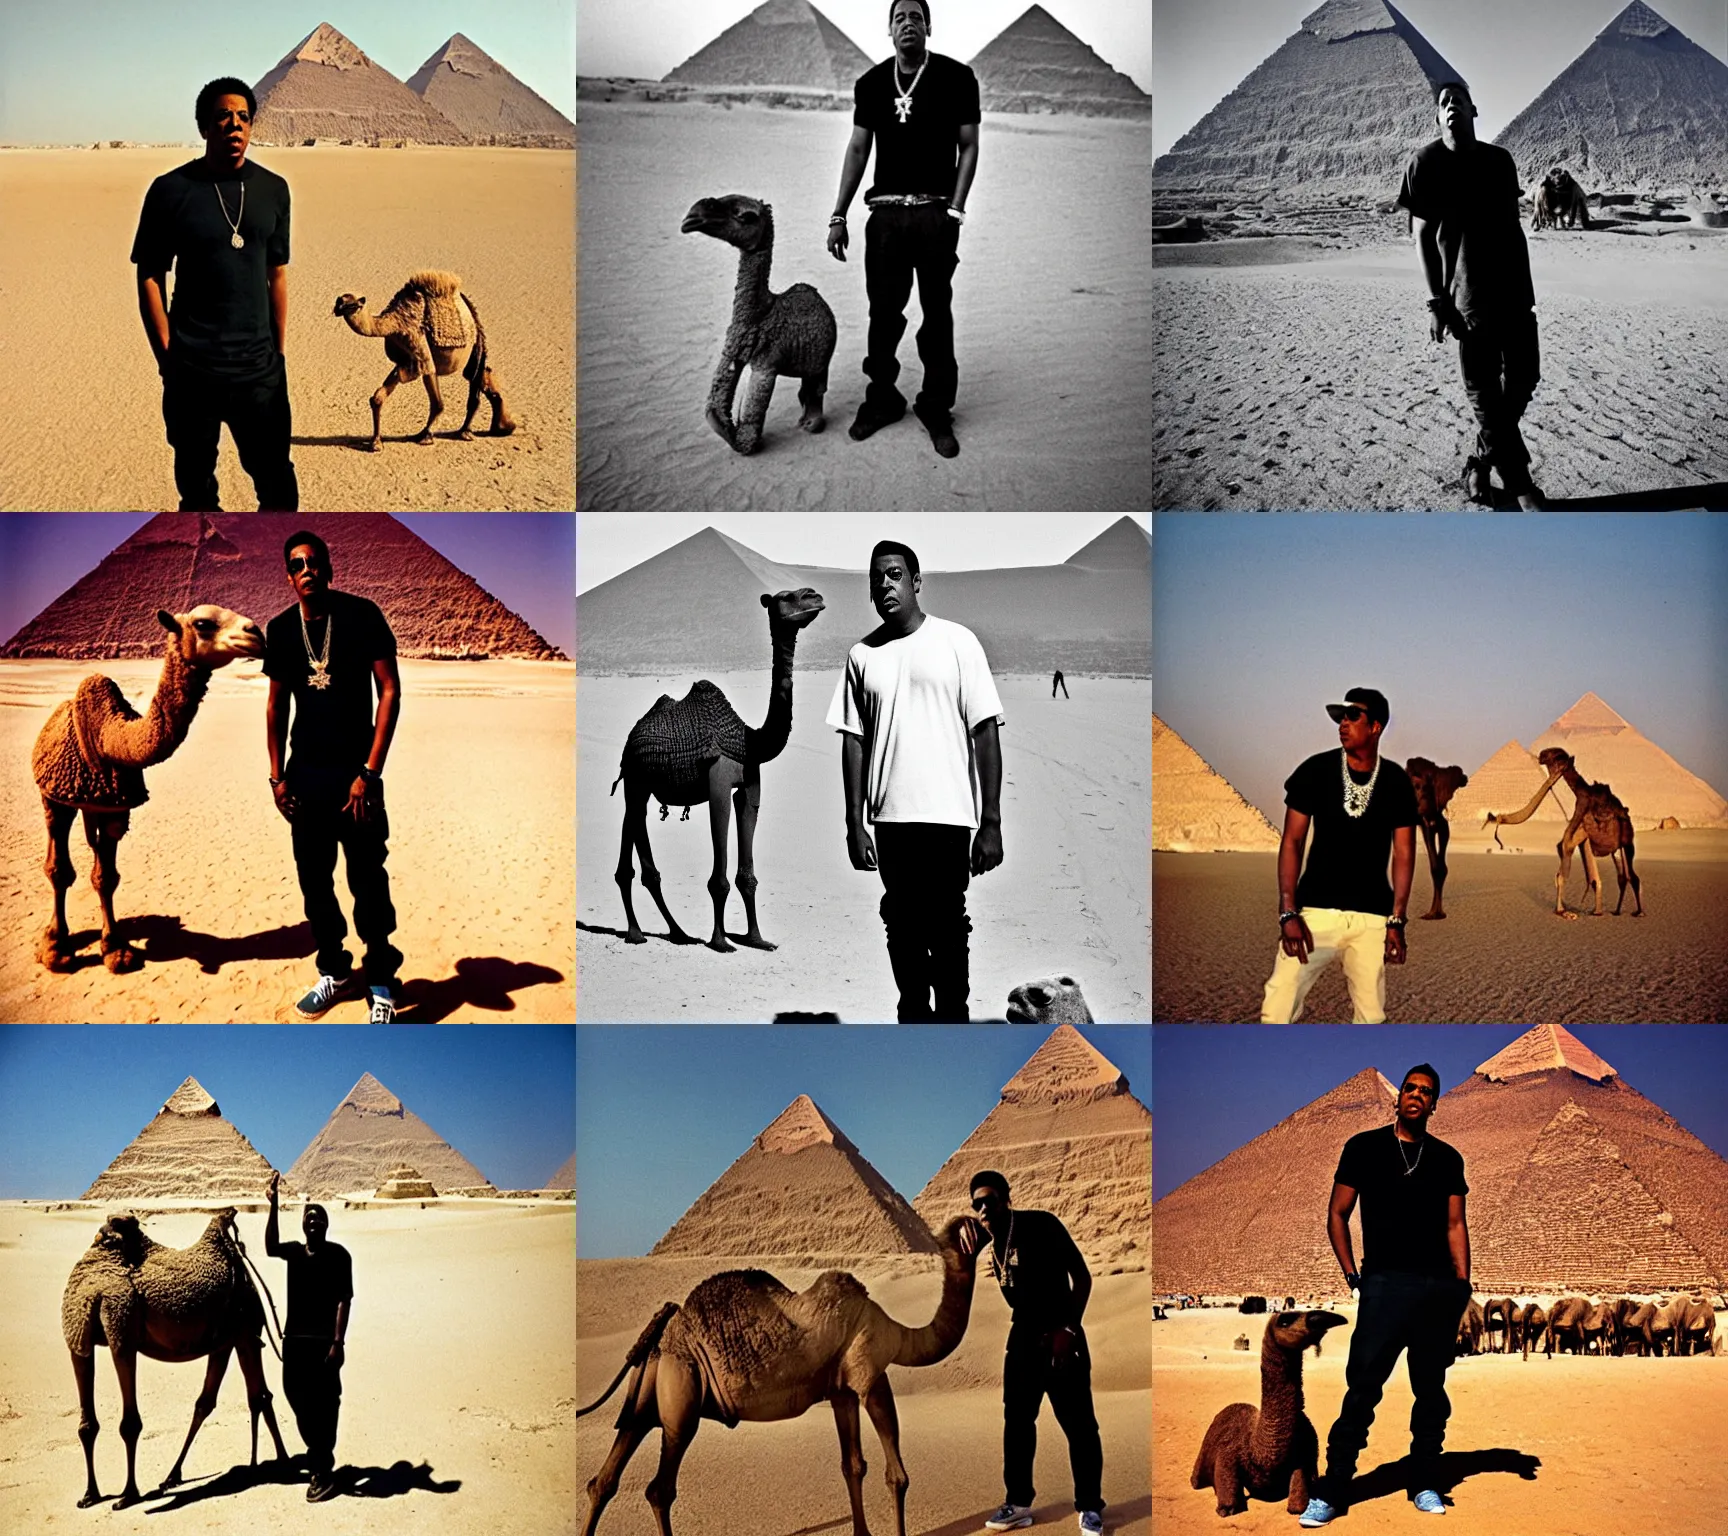 Prompt: jay - z shawn carter wearing a black t - shirt and skinny jeans, standing next to a camel, sand desert, pyramids in background, photography by helen levitt, good lighting, no blur